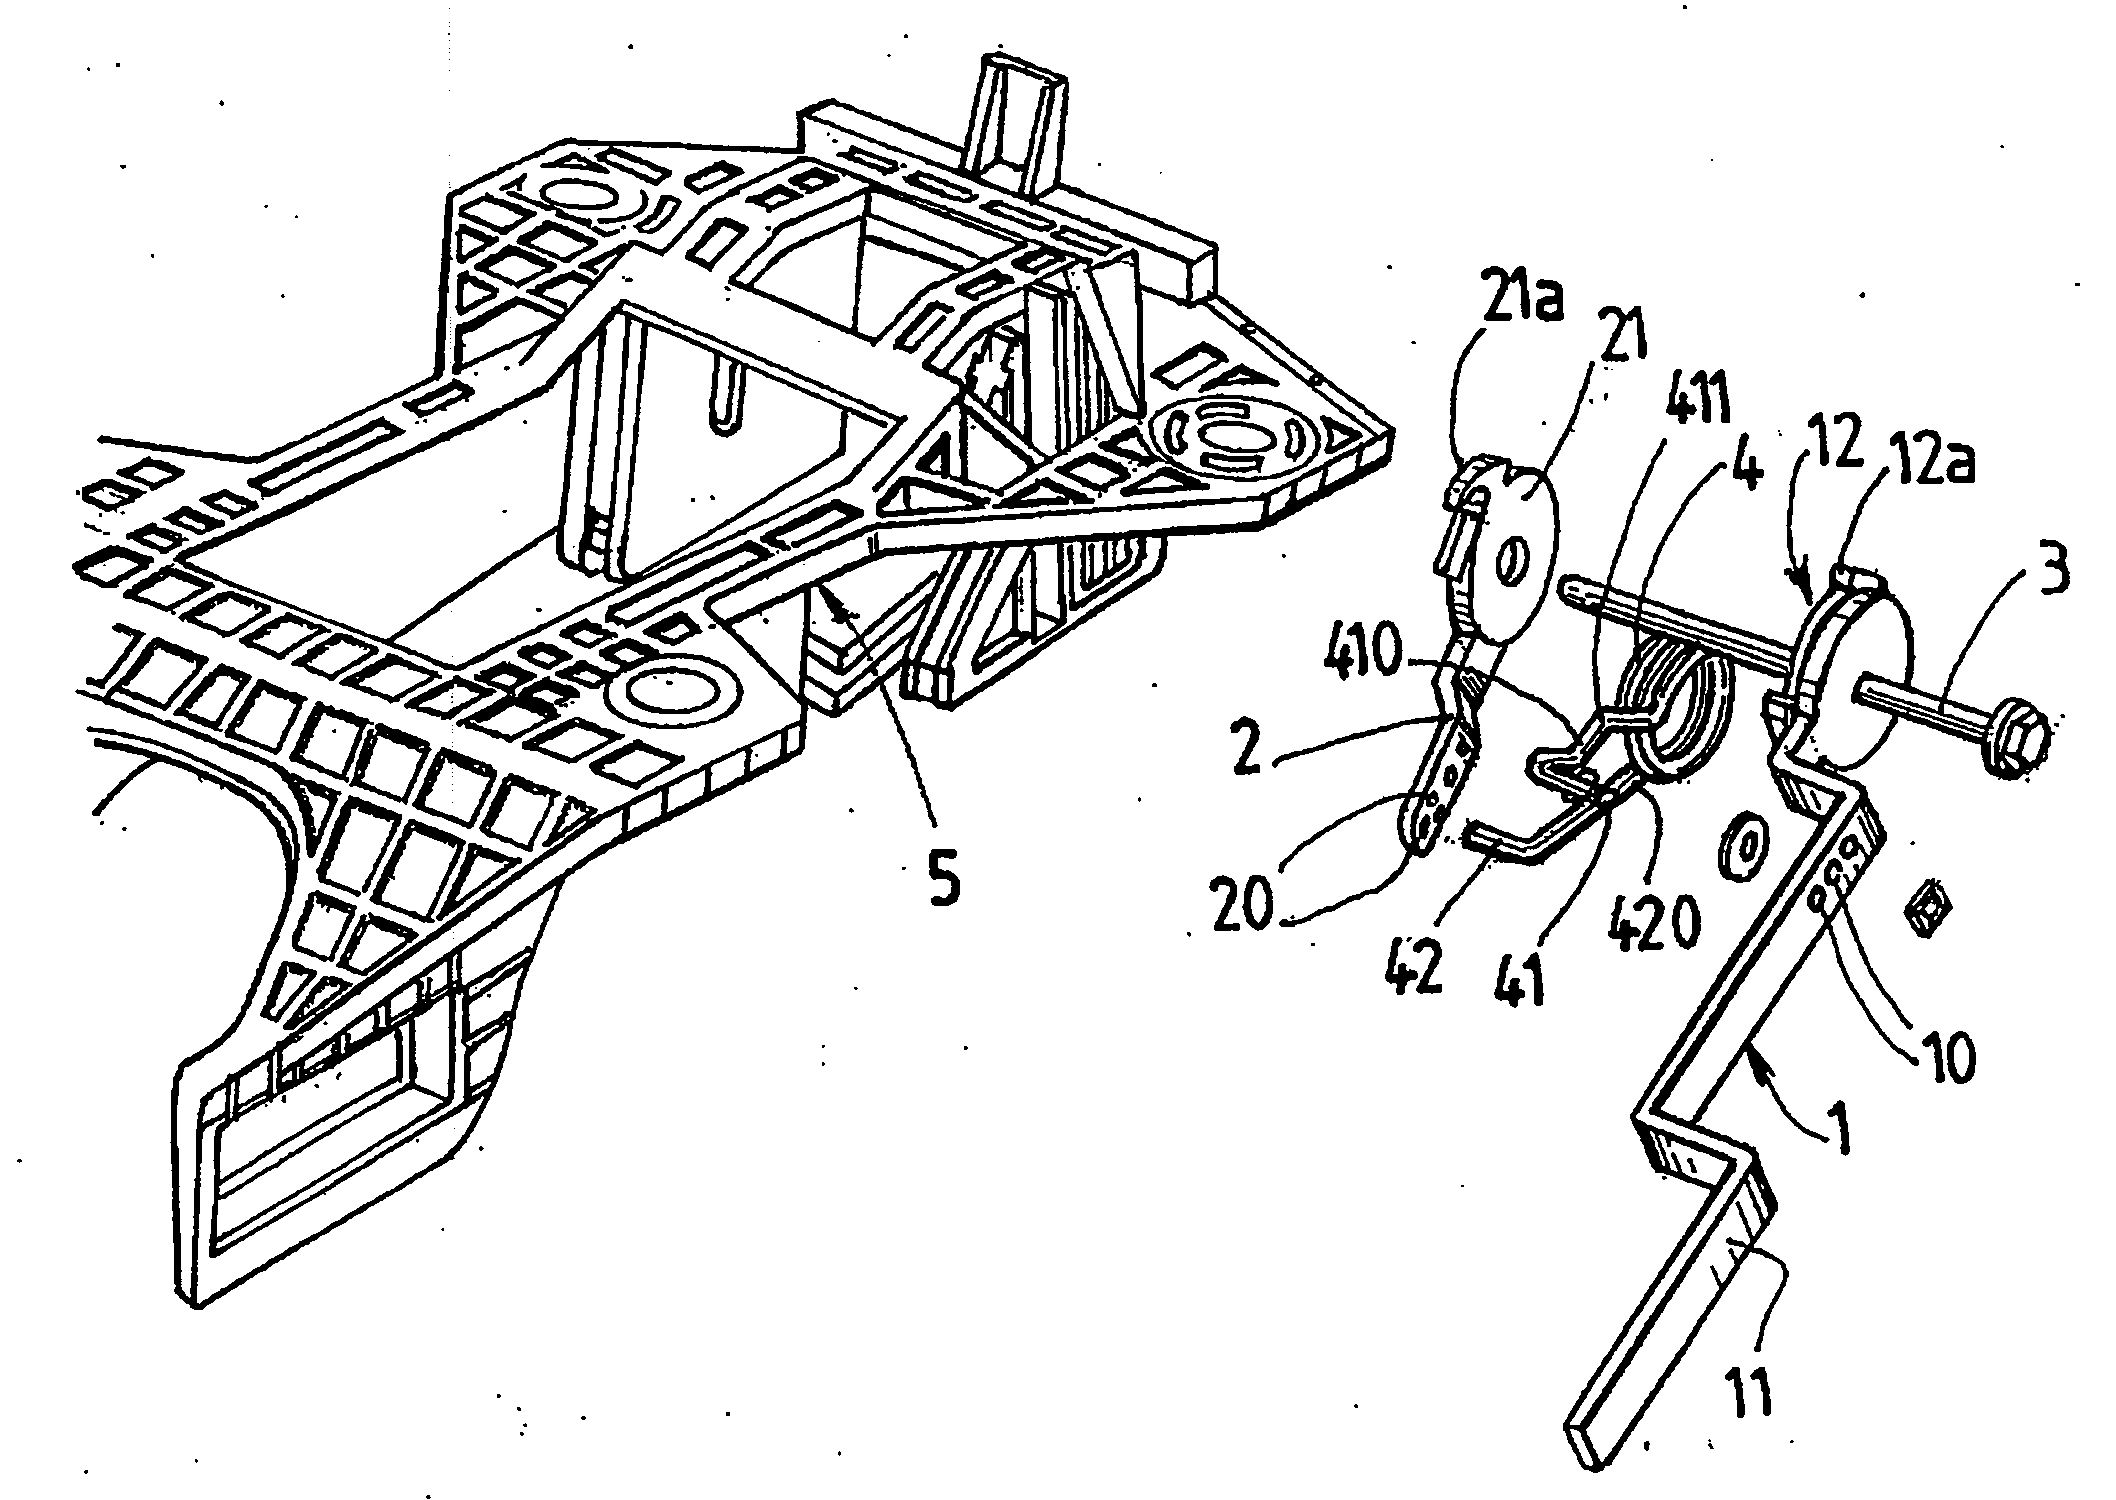 Device assisting with the locking of a steering column